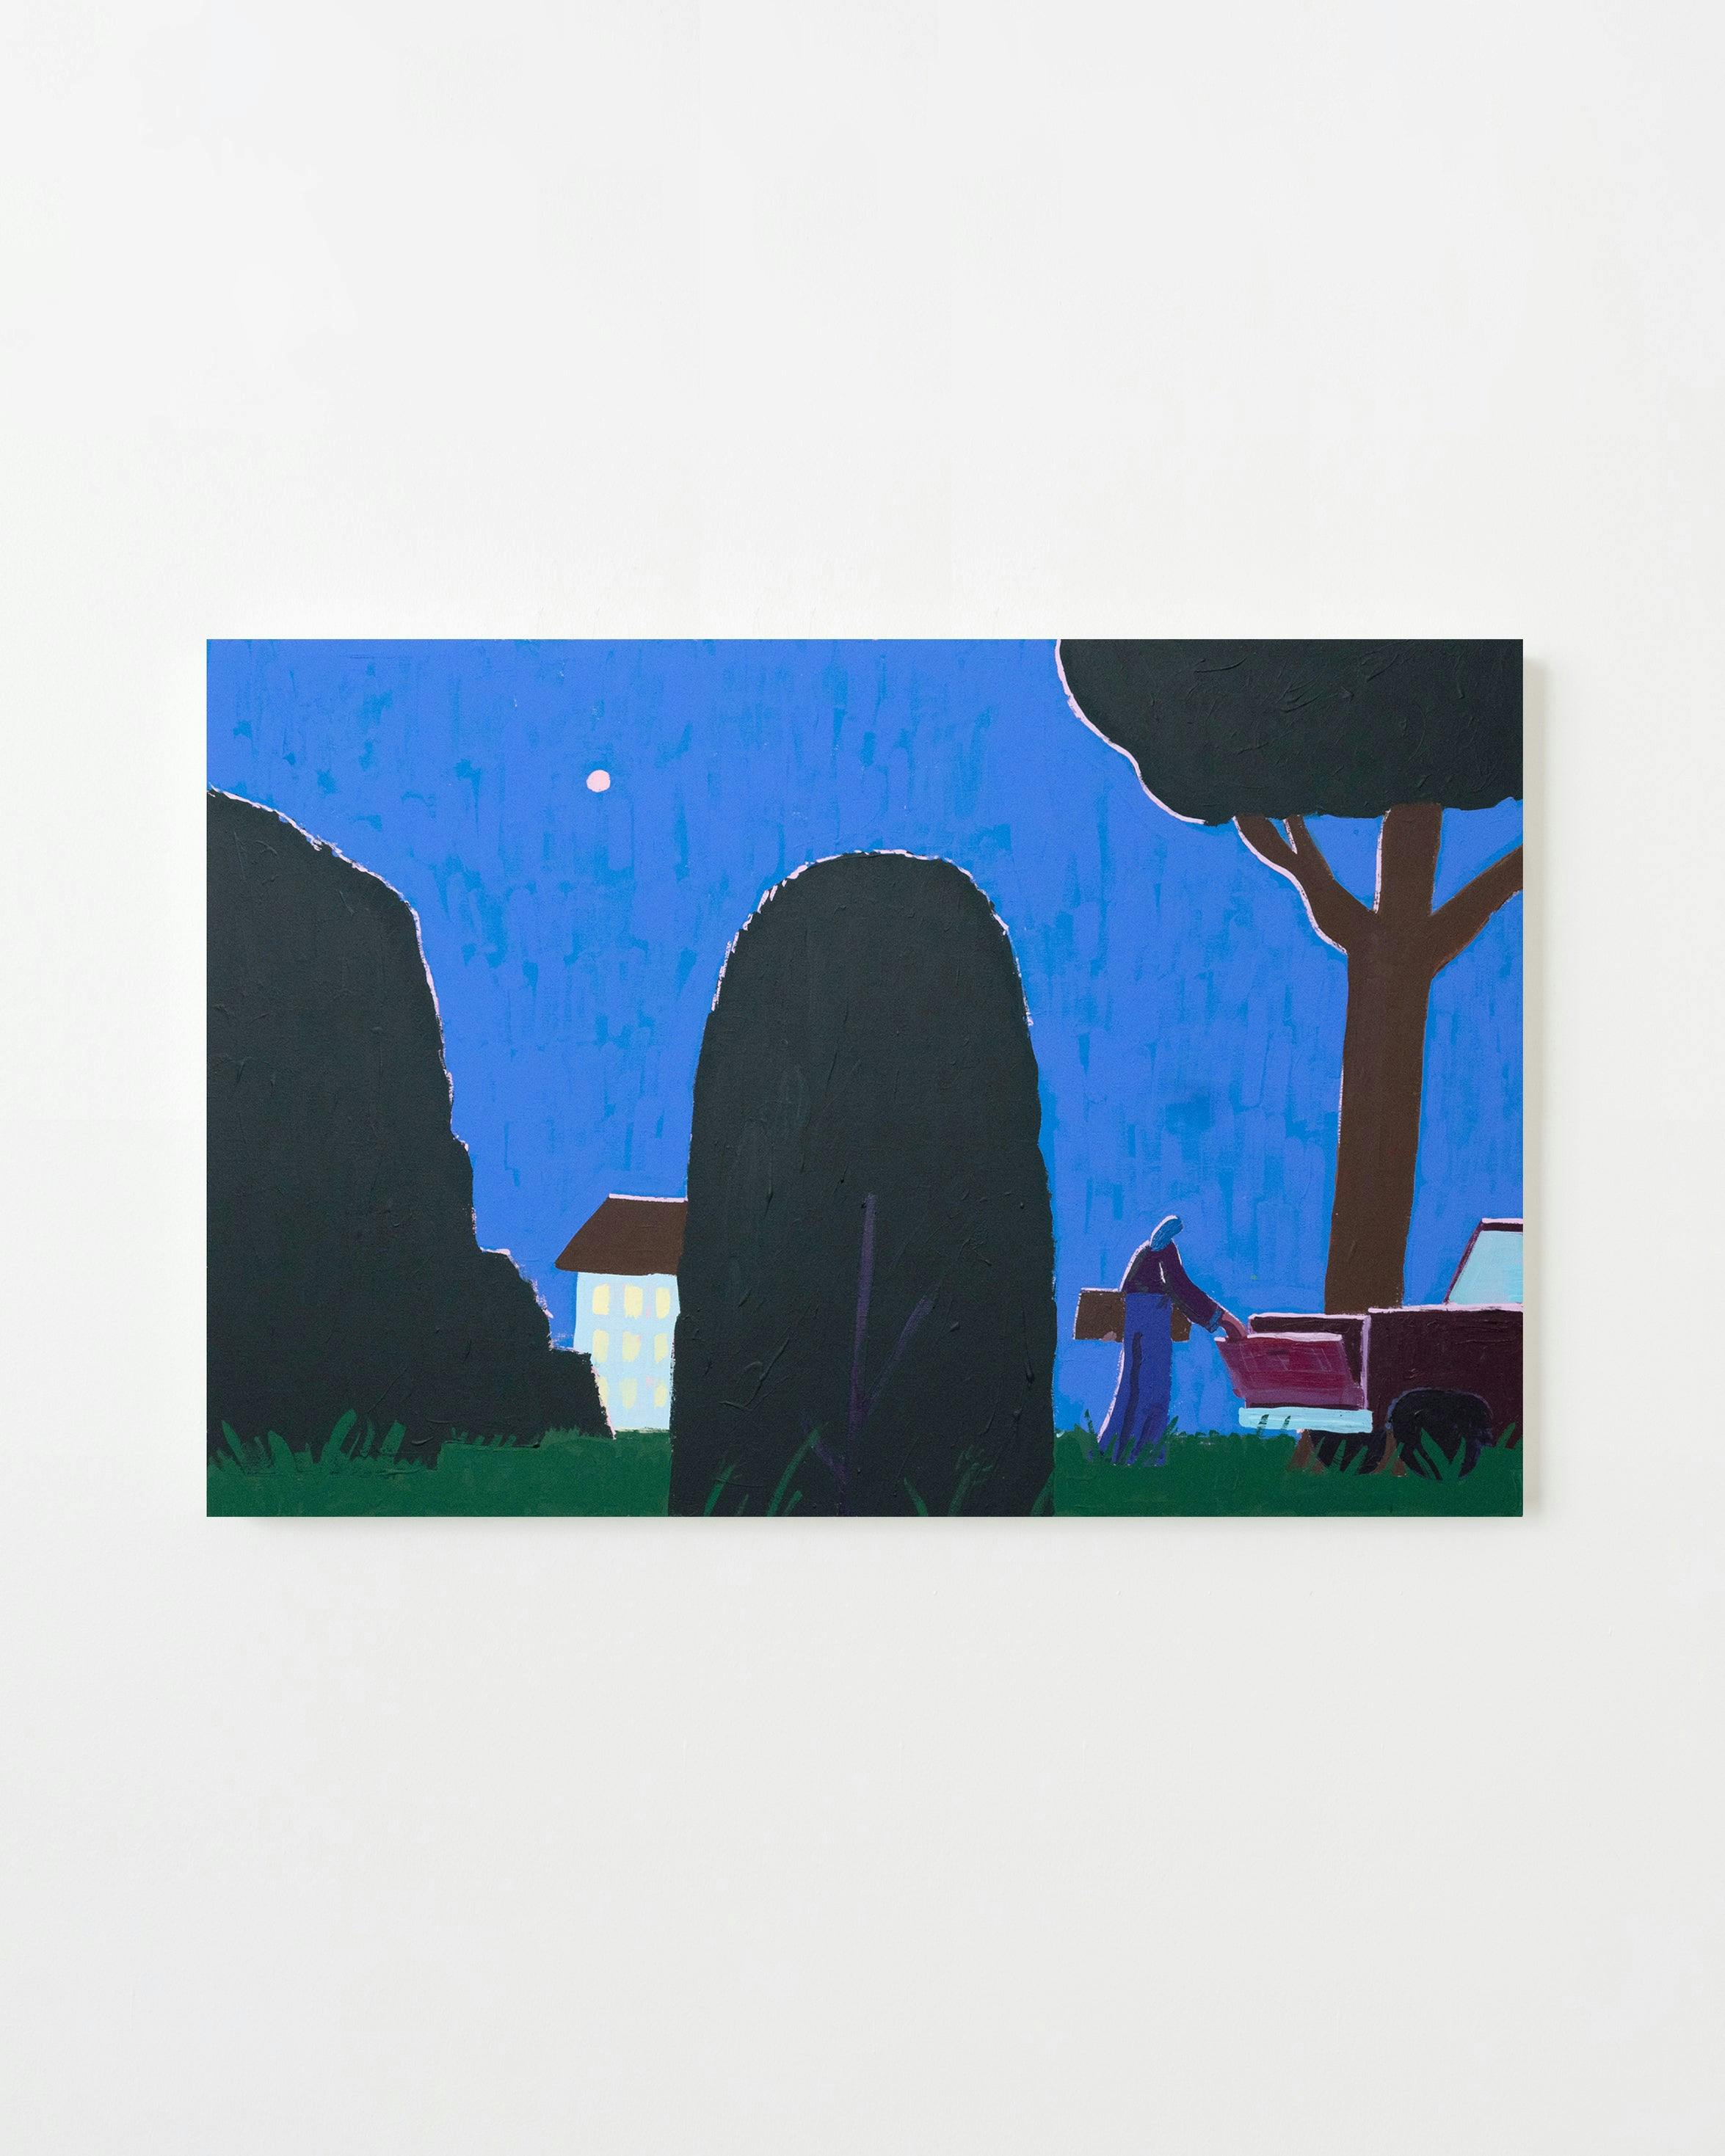 Painting by Jackson Joyce titled "Night at the Ellerbe Artist Colony".